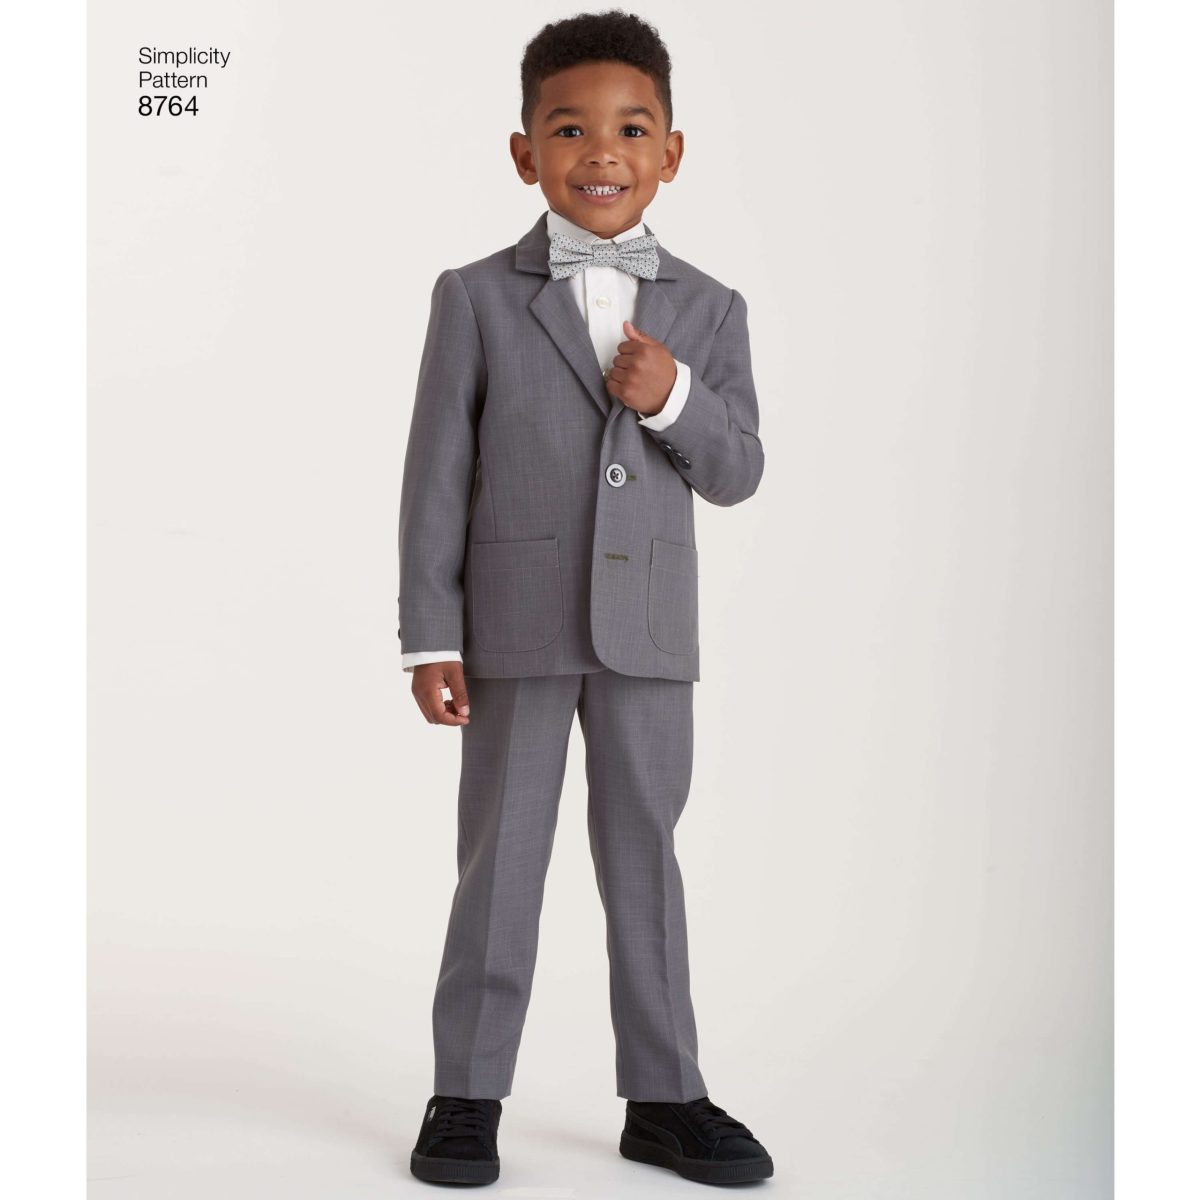 Simplicity Sewing Pattern 8764 Boys' Suit and Ties